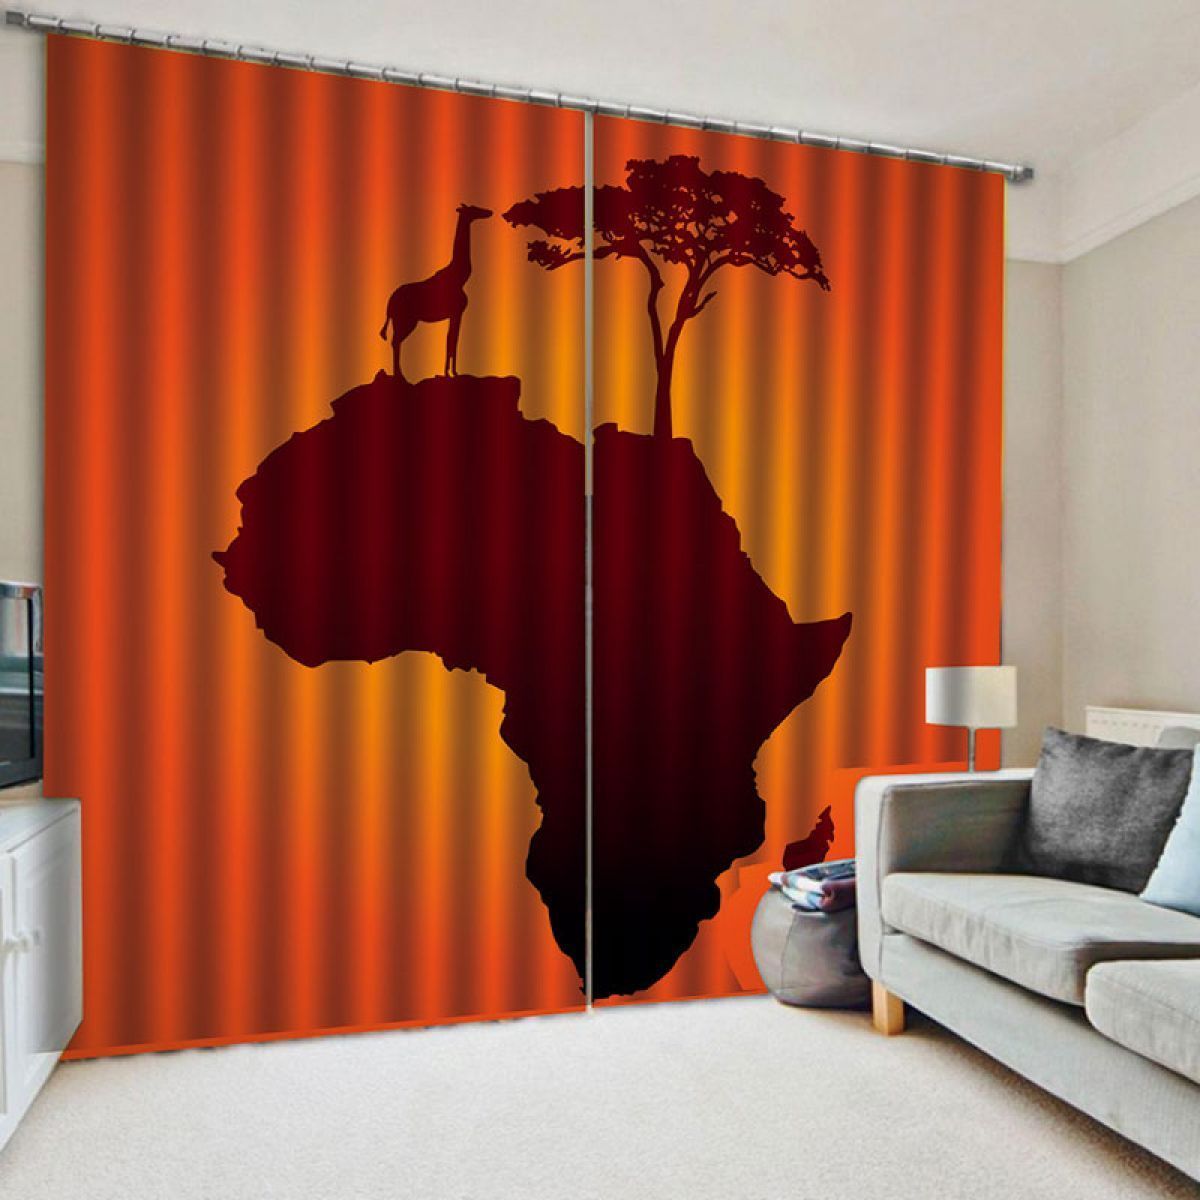 Giraffe And Tree On The Map Of Africa Printed Window Curtain Home Decor